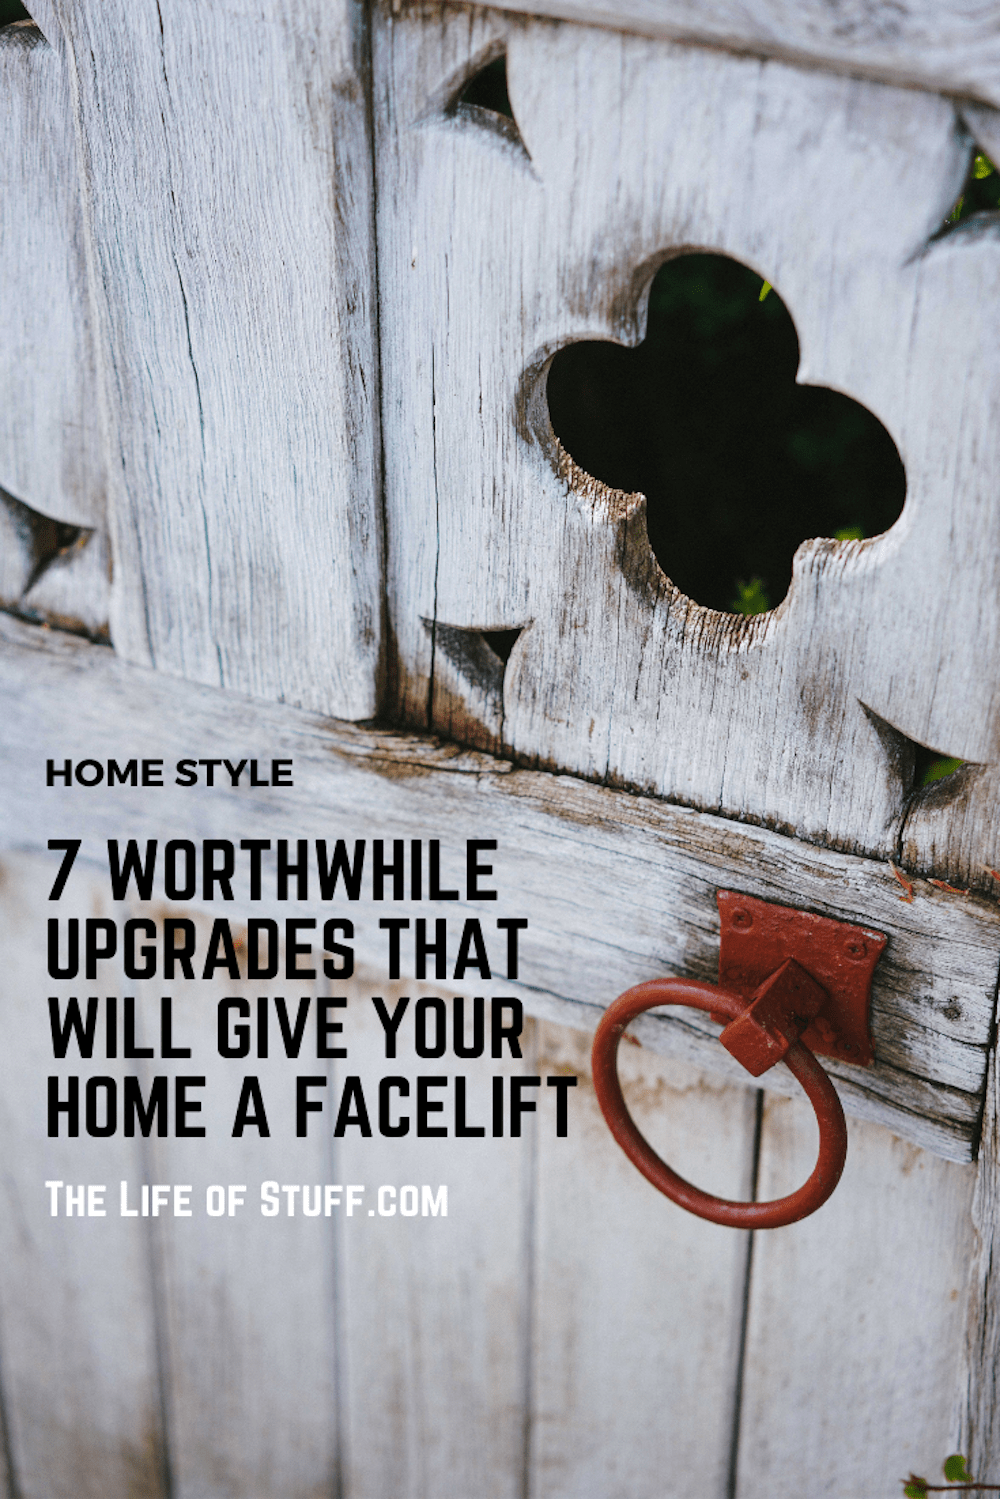 Worthwhile Upgrades That Will Give Your Home a Facelift - The Life of Stuff